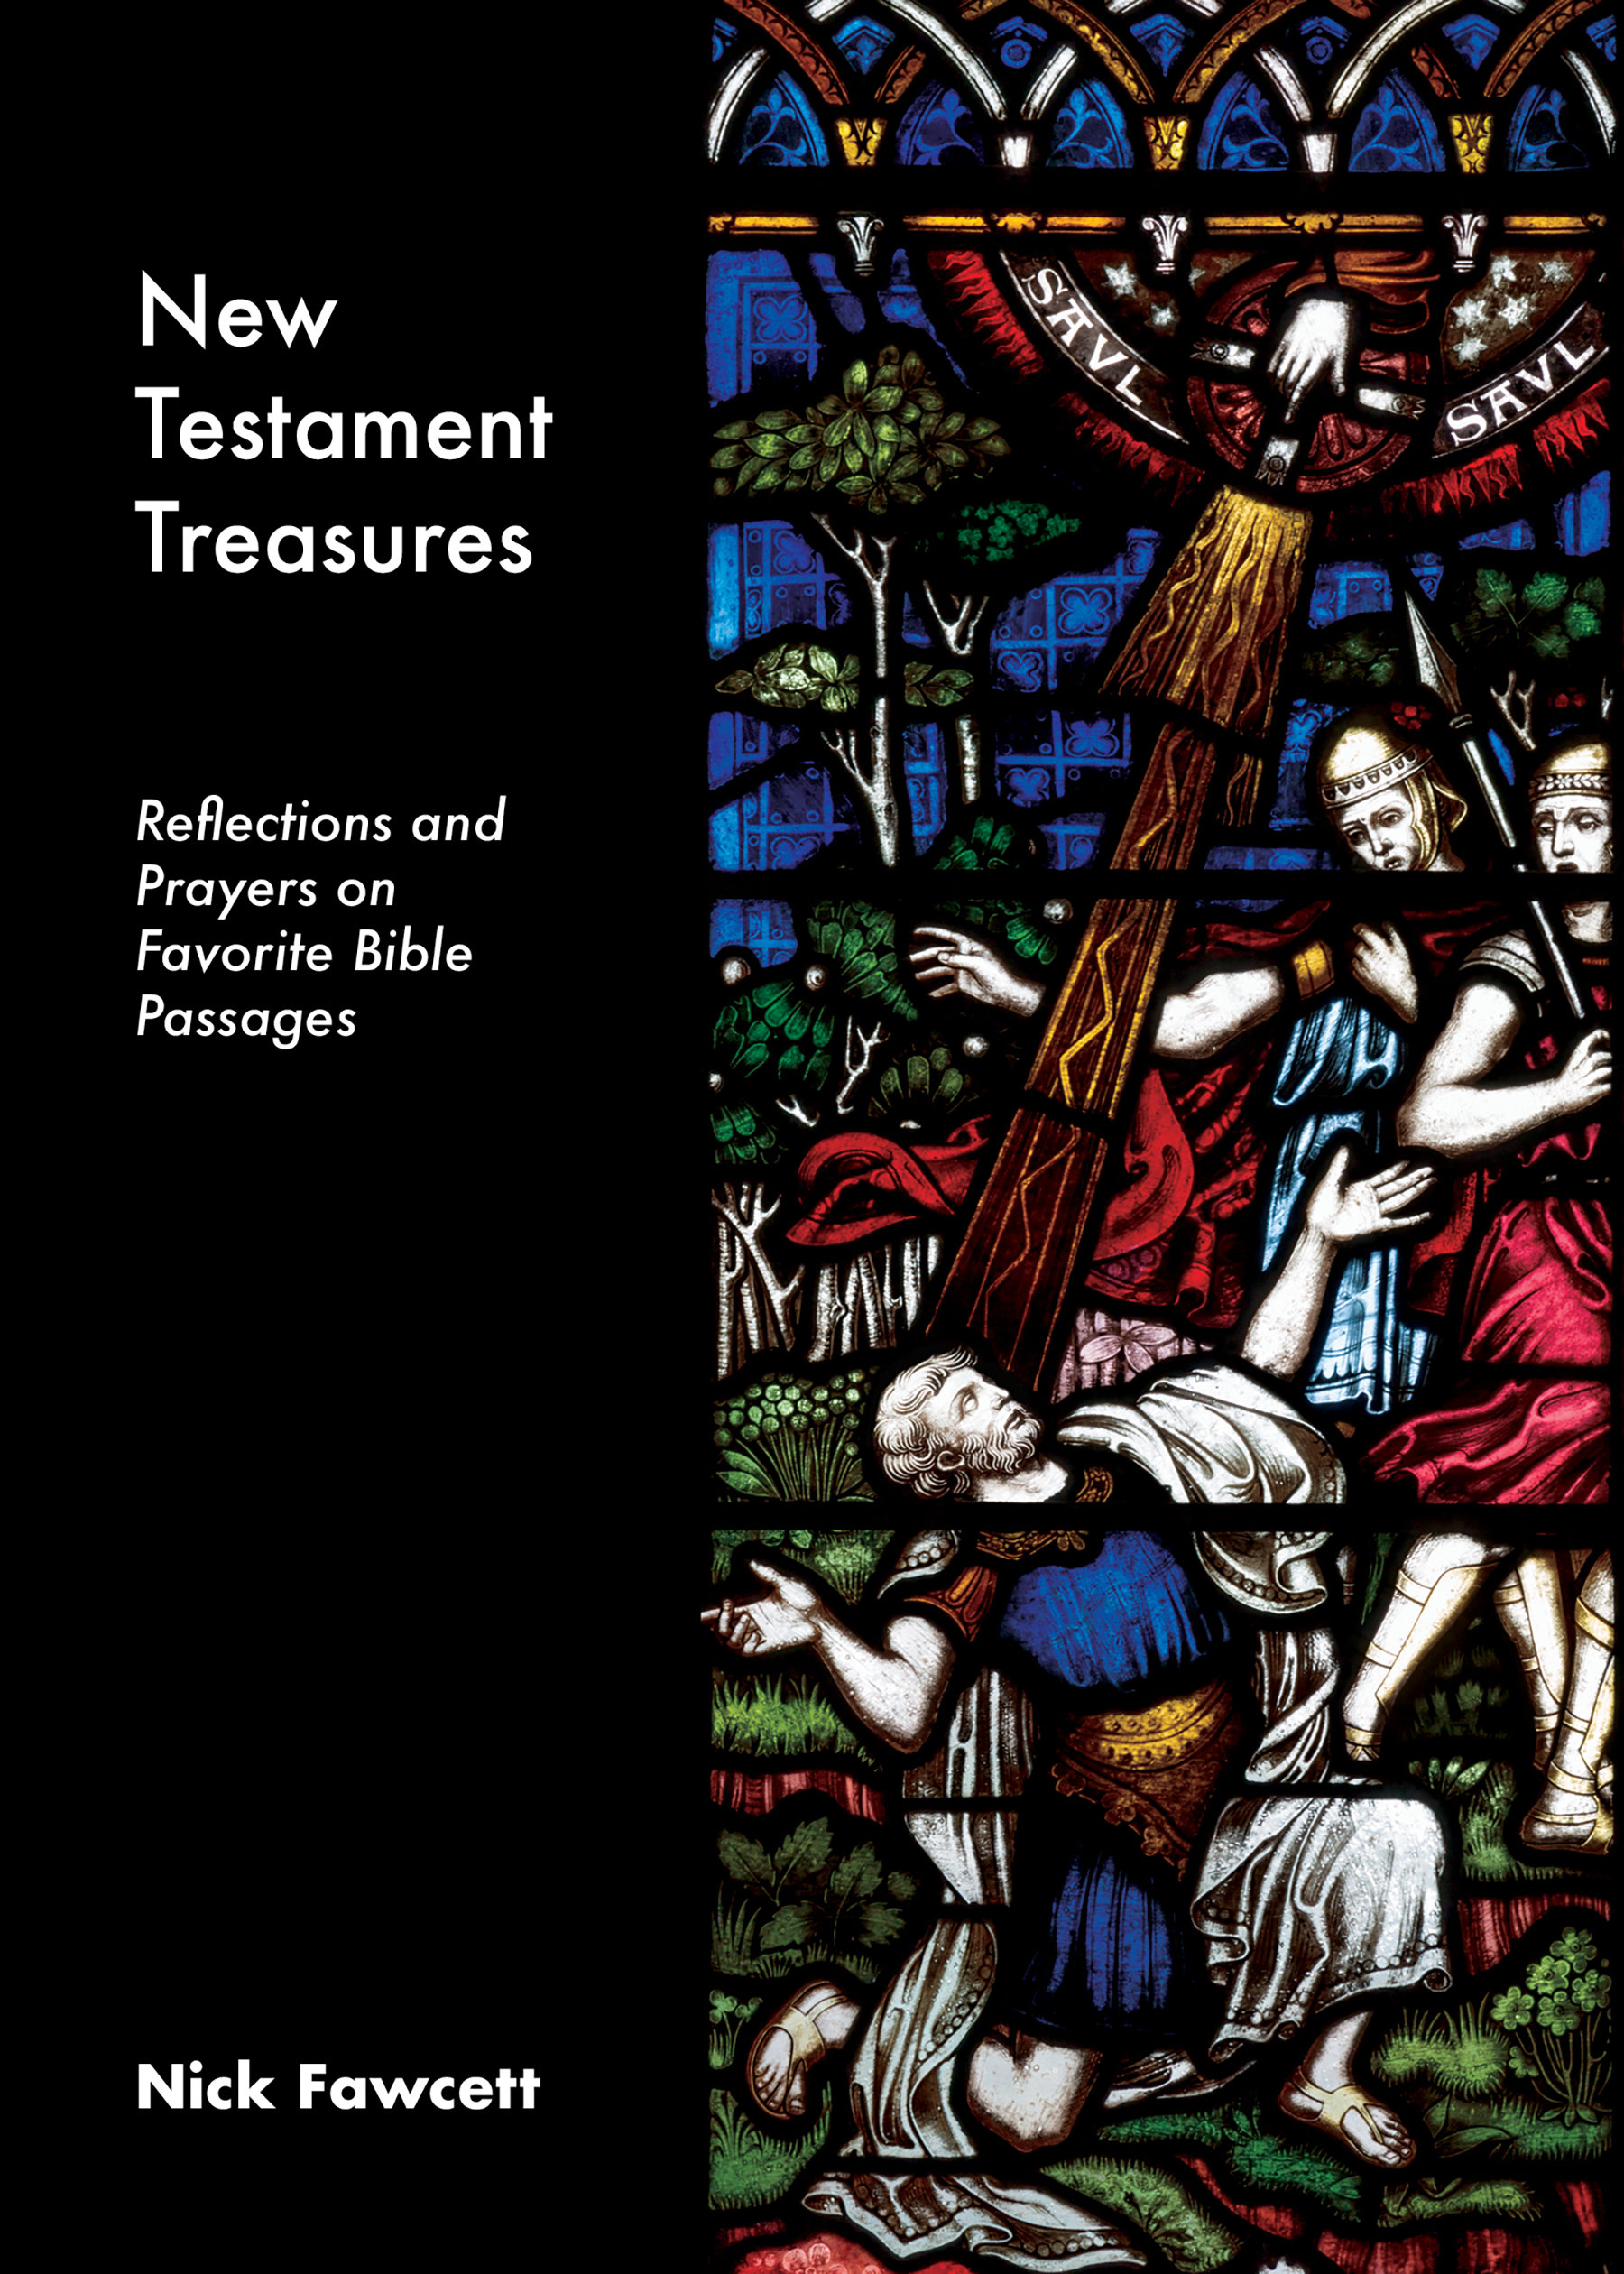 New Testament Treasures: Reflections and Prayers on Favorite Bible Passages